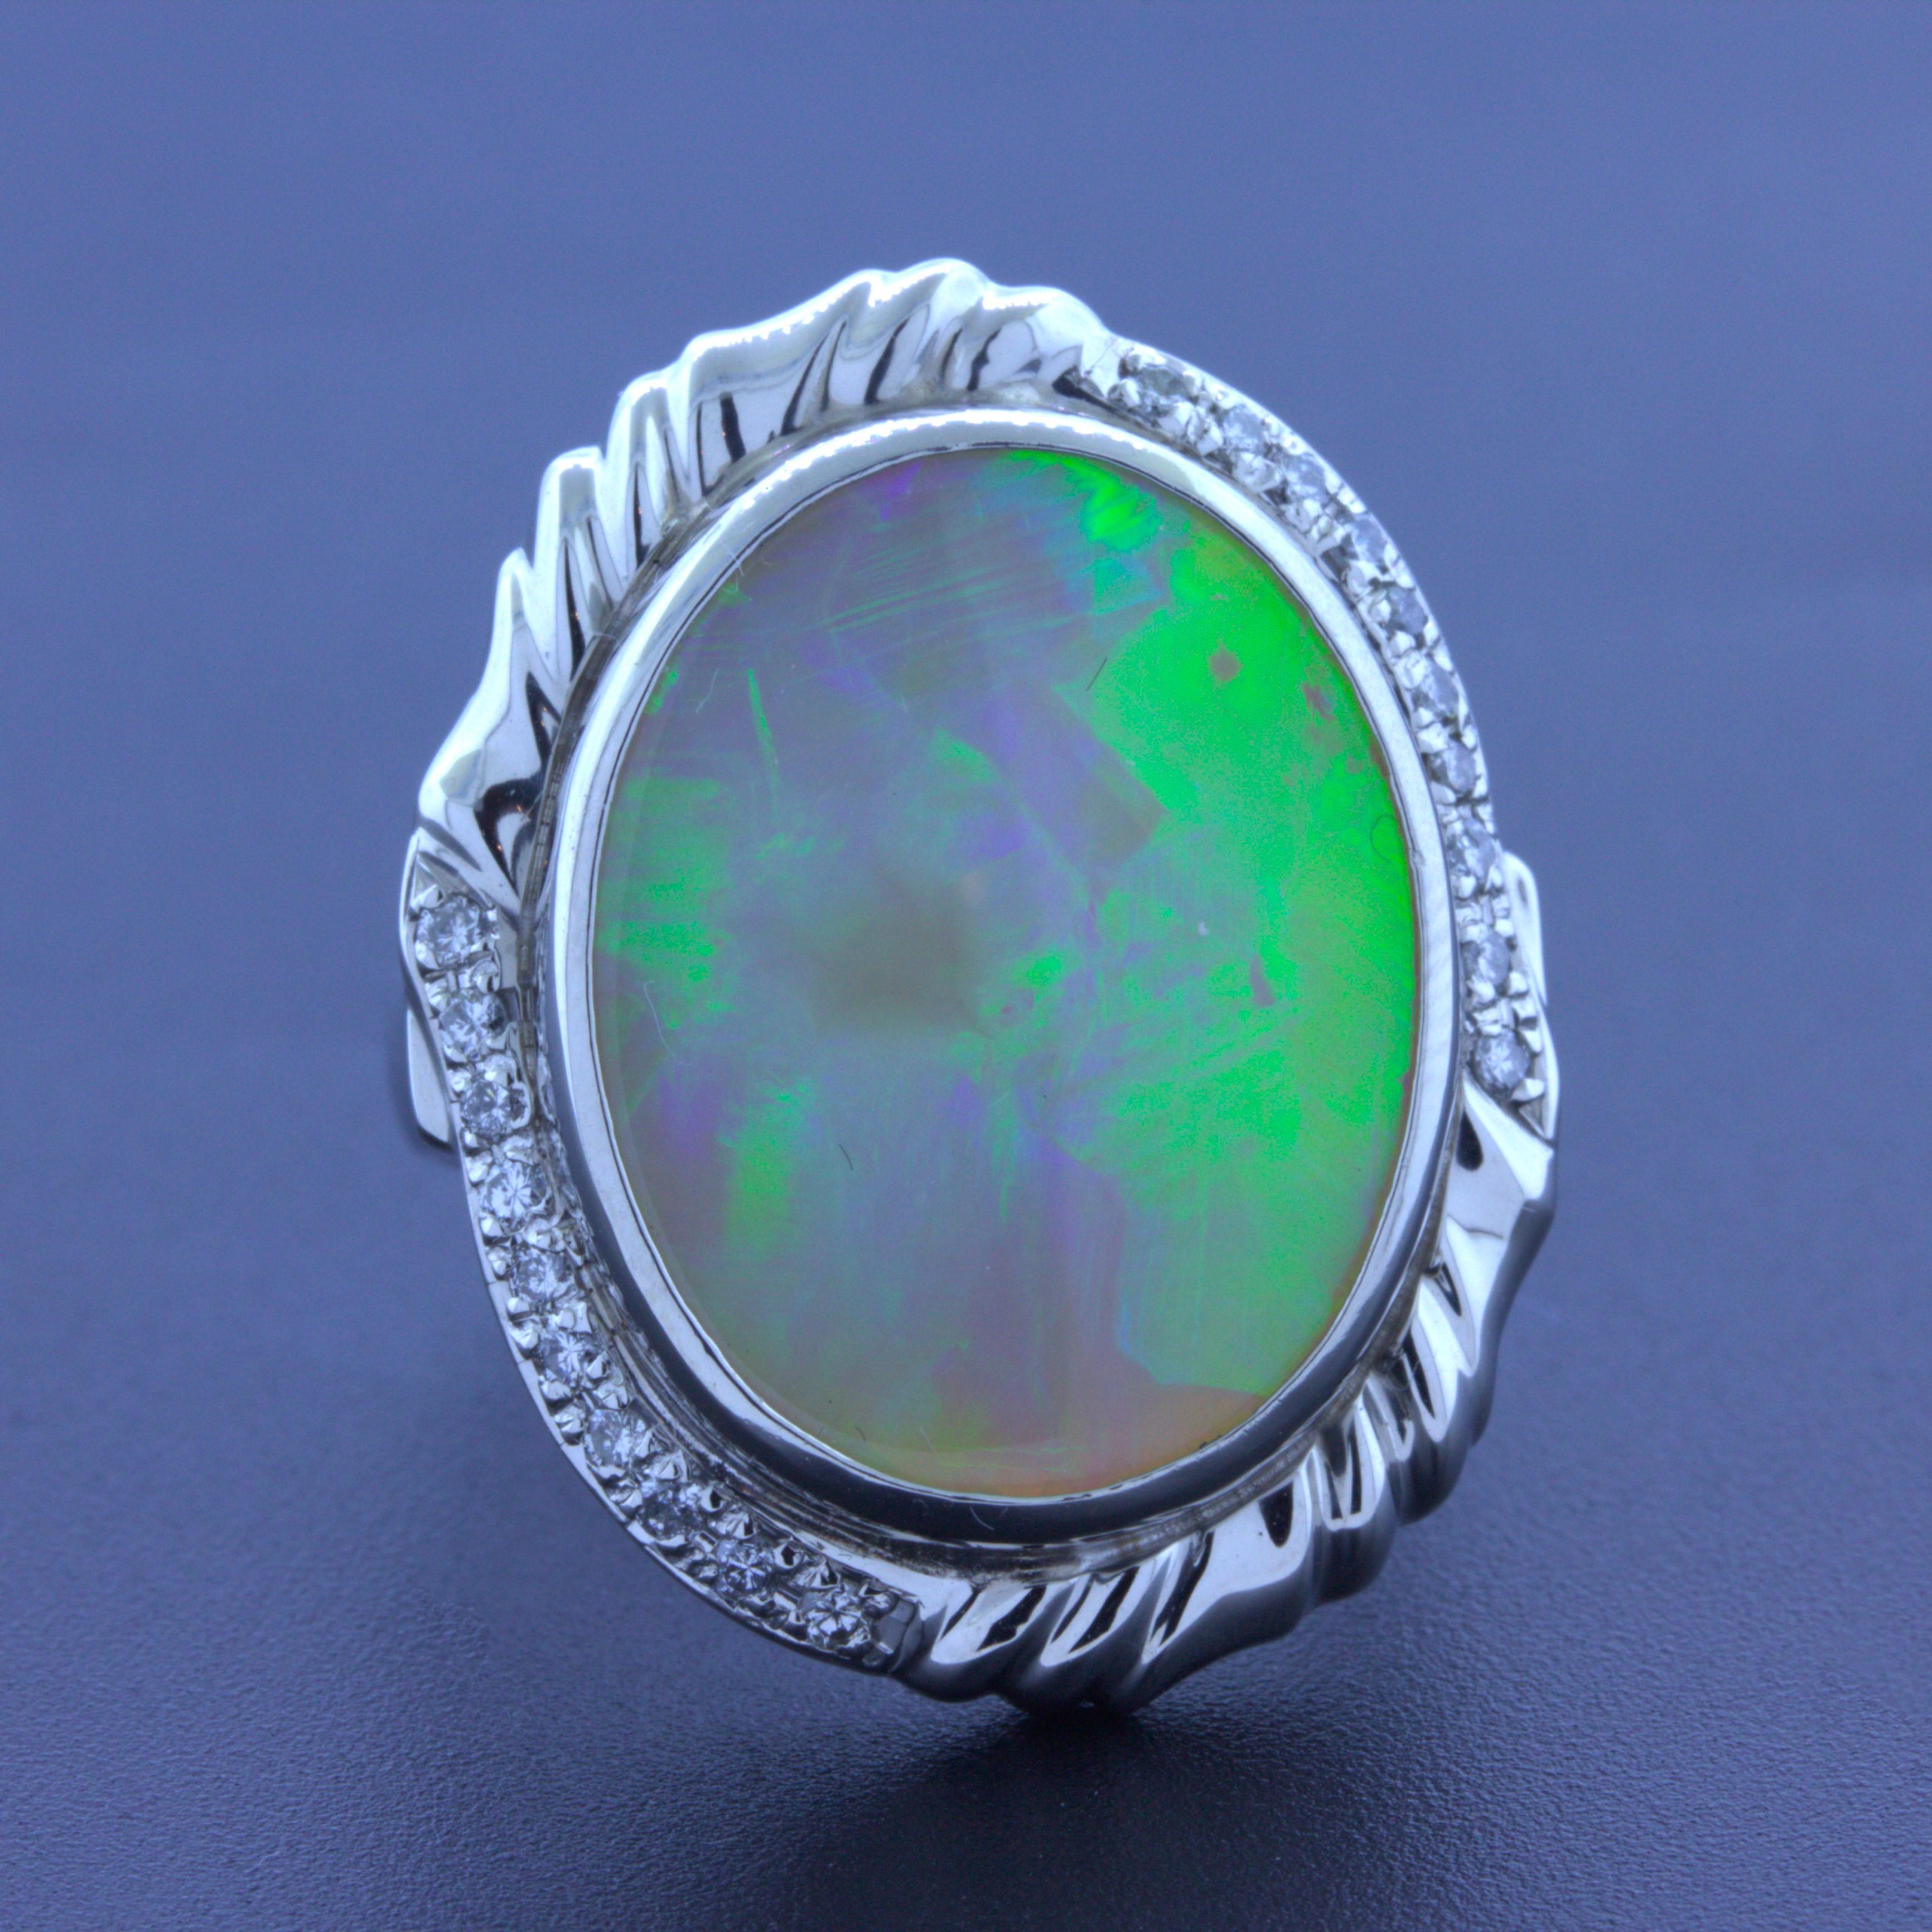 A lovely Australian opal weighing 12.56 carats is the center of this platinum ring. It has fantastic play-of-color with a rare feather pattern that runs east to west showcasing flashes of green and blue with hints of yellow. It is complemented by